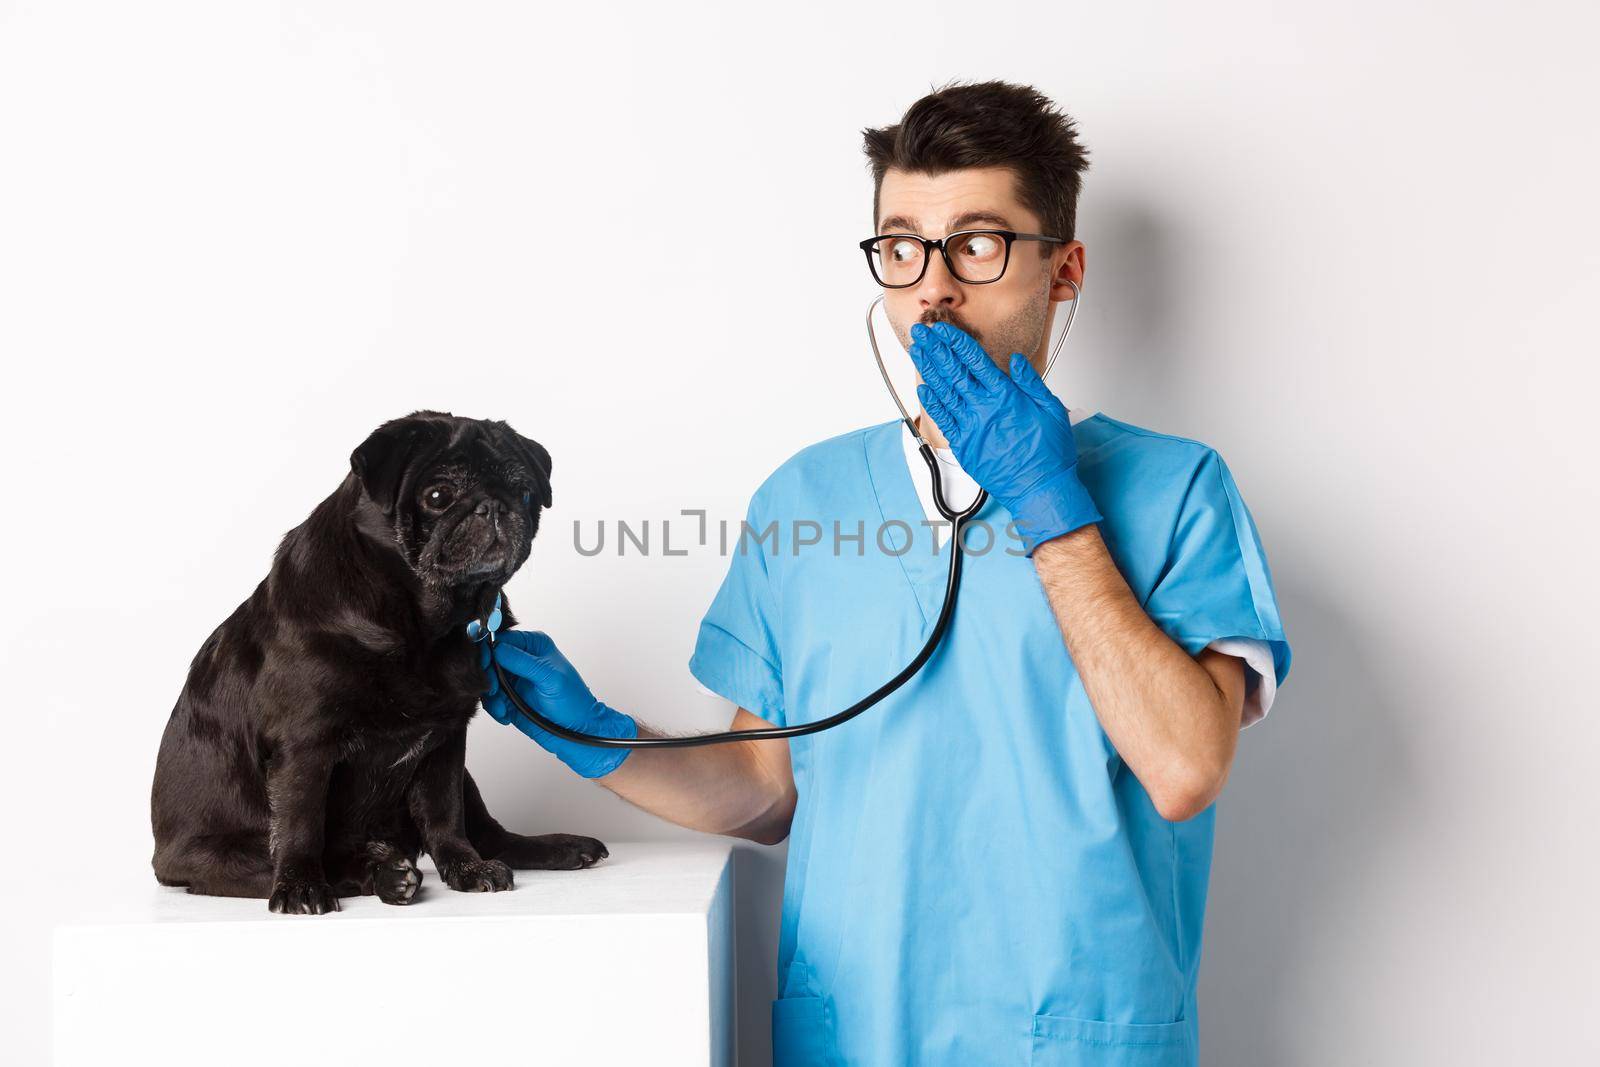 Shocked doctor in vet clinic examining dog with stethoscope, gasping amazed while cute black pug sitting still on table, white background.